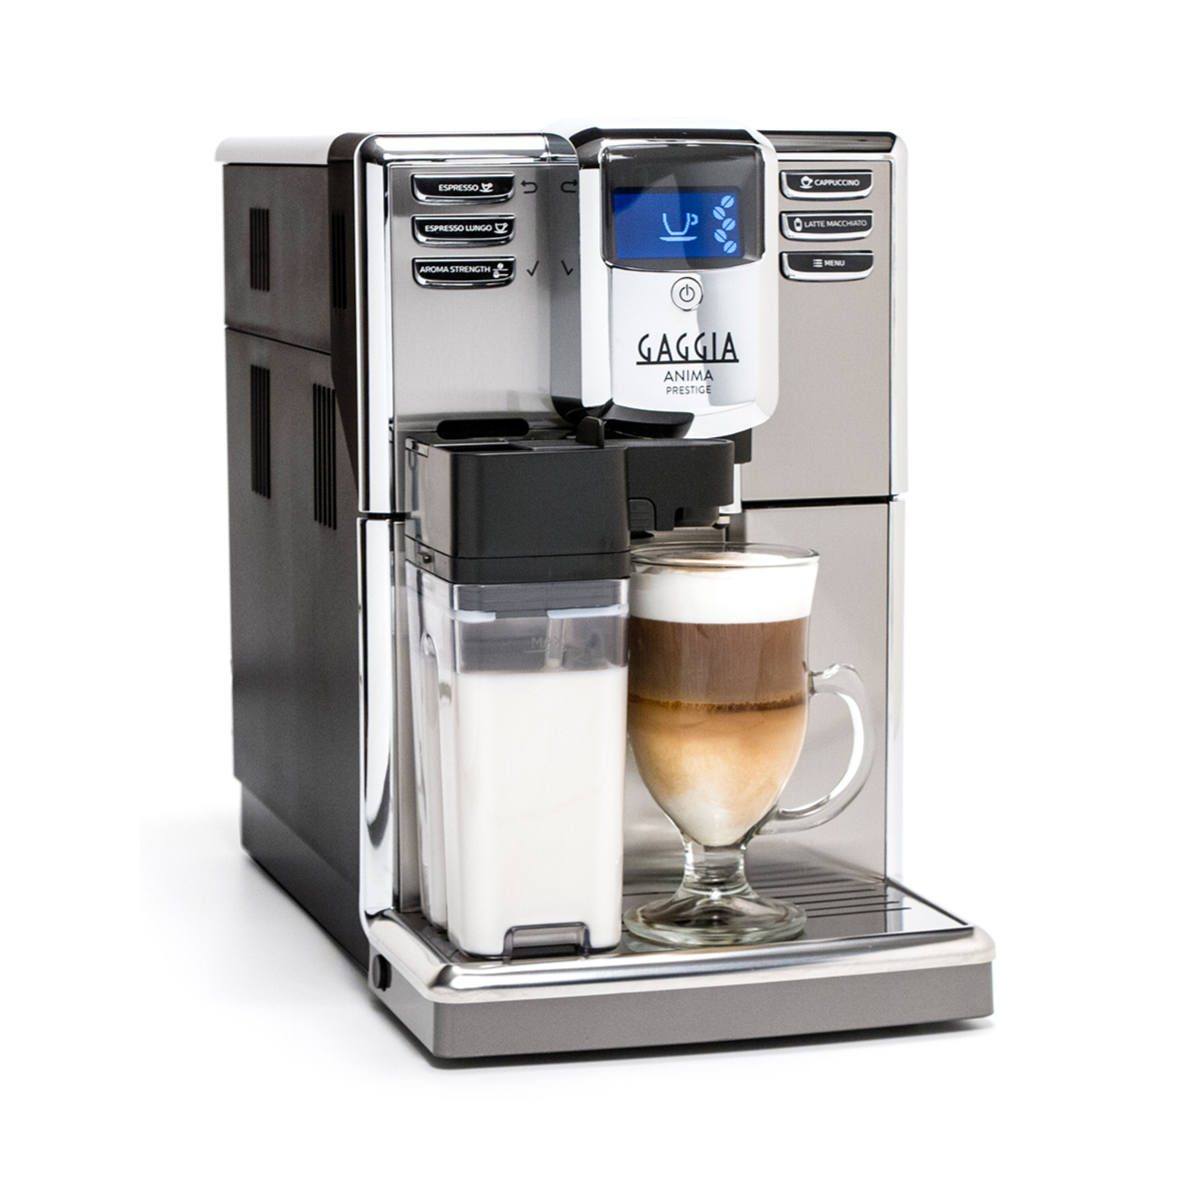 One of the standout features of this machine is its advanced grinding system. With a ceramic burr grinder, the Gaggia Anima Prestige finely grinds coffee beans to achieve the perfect consistency, resulting in enhanced flavor and irresistible aroma in every cup.